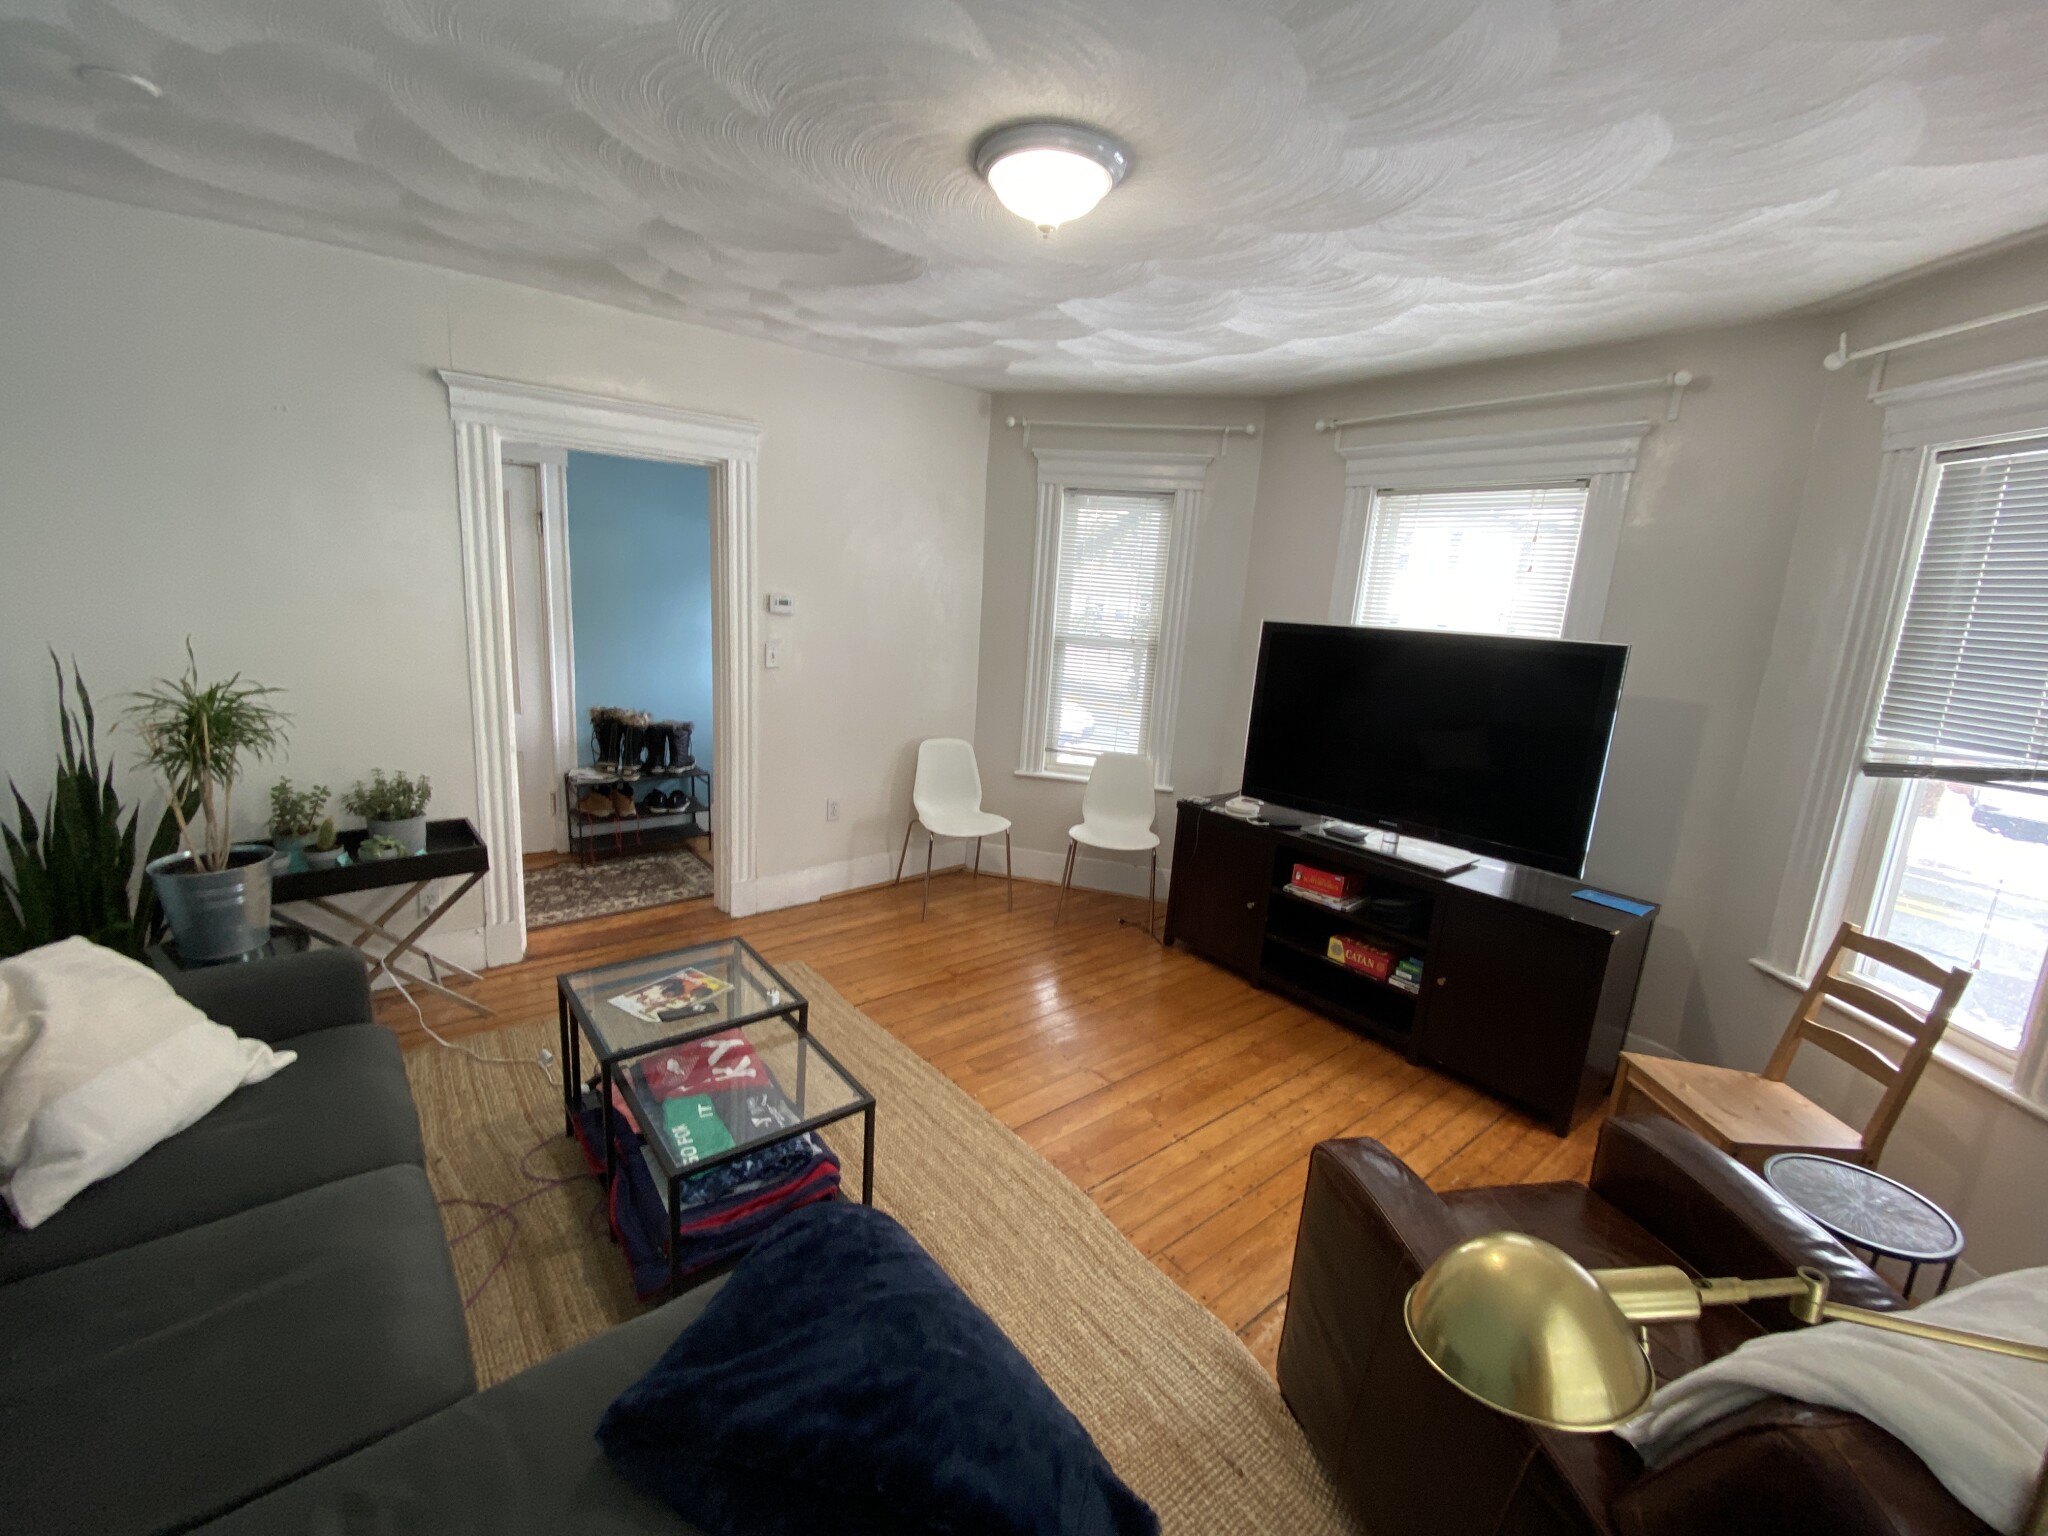 Photos of apartment on Bay State Ave.,Somerville MA 02144